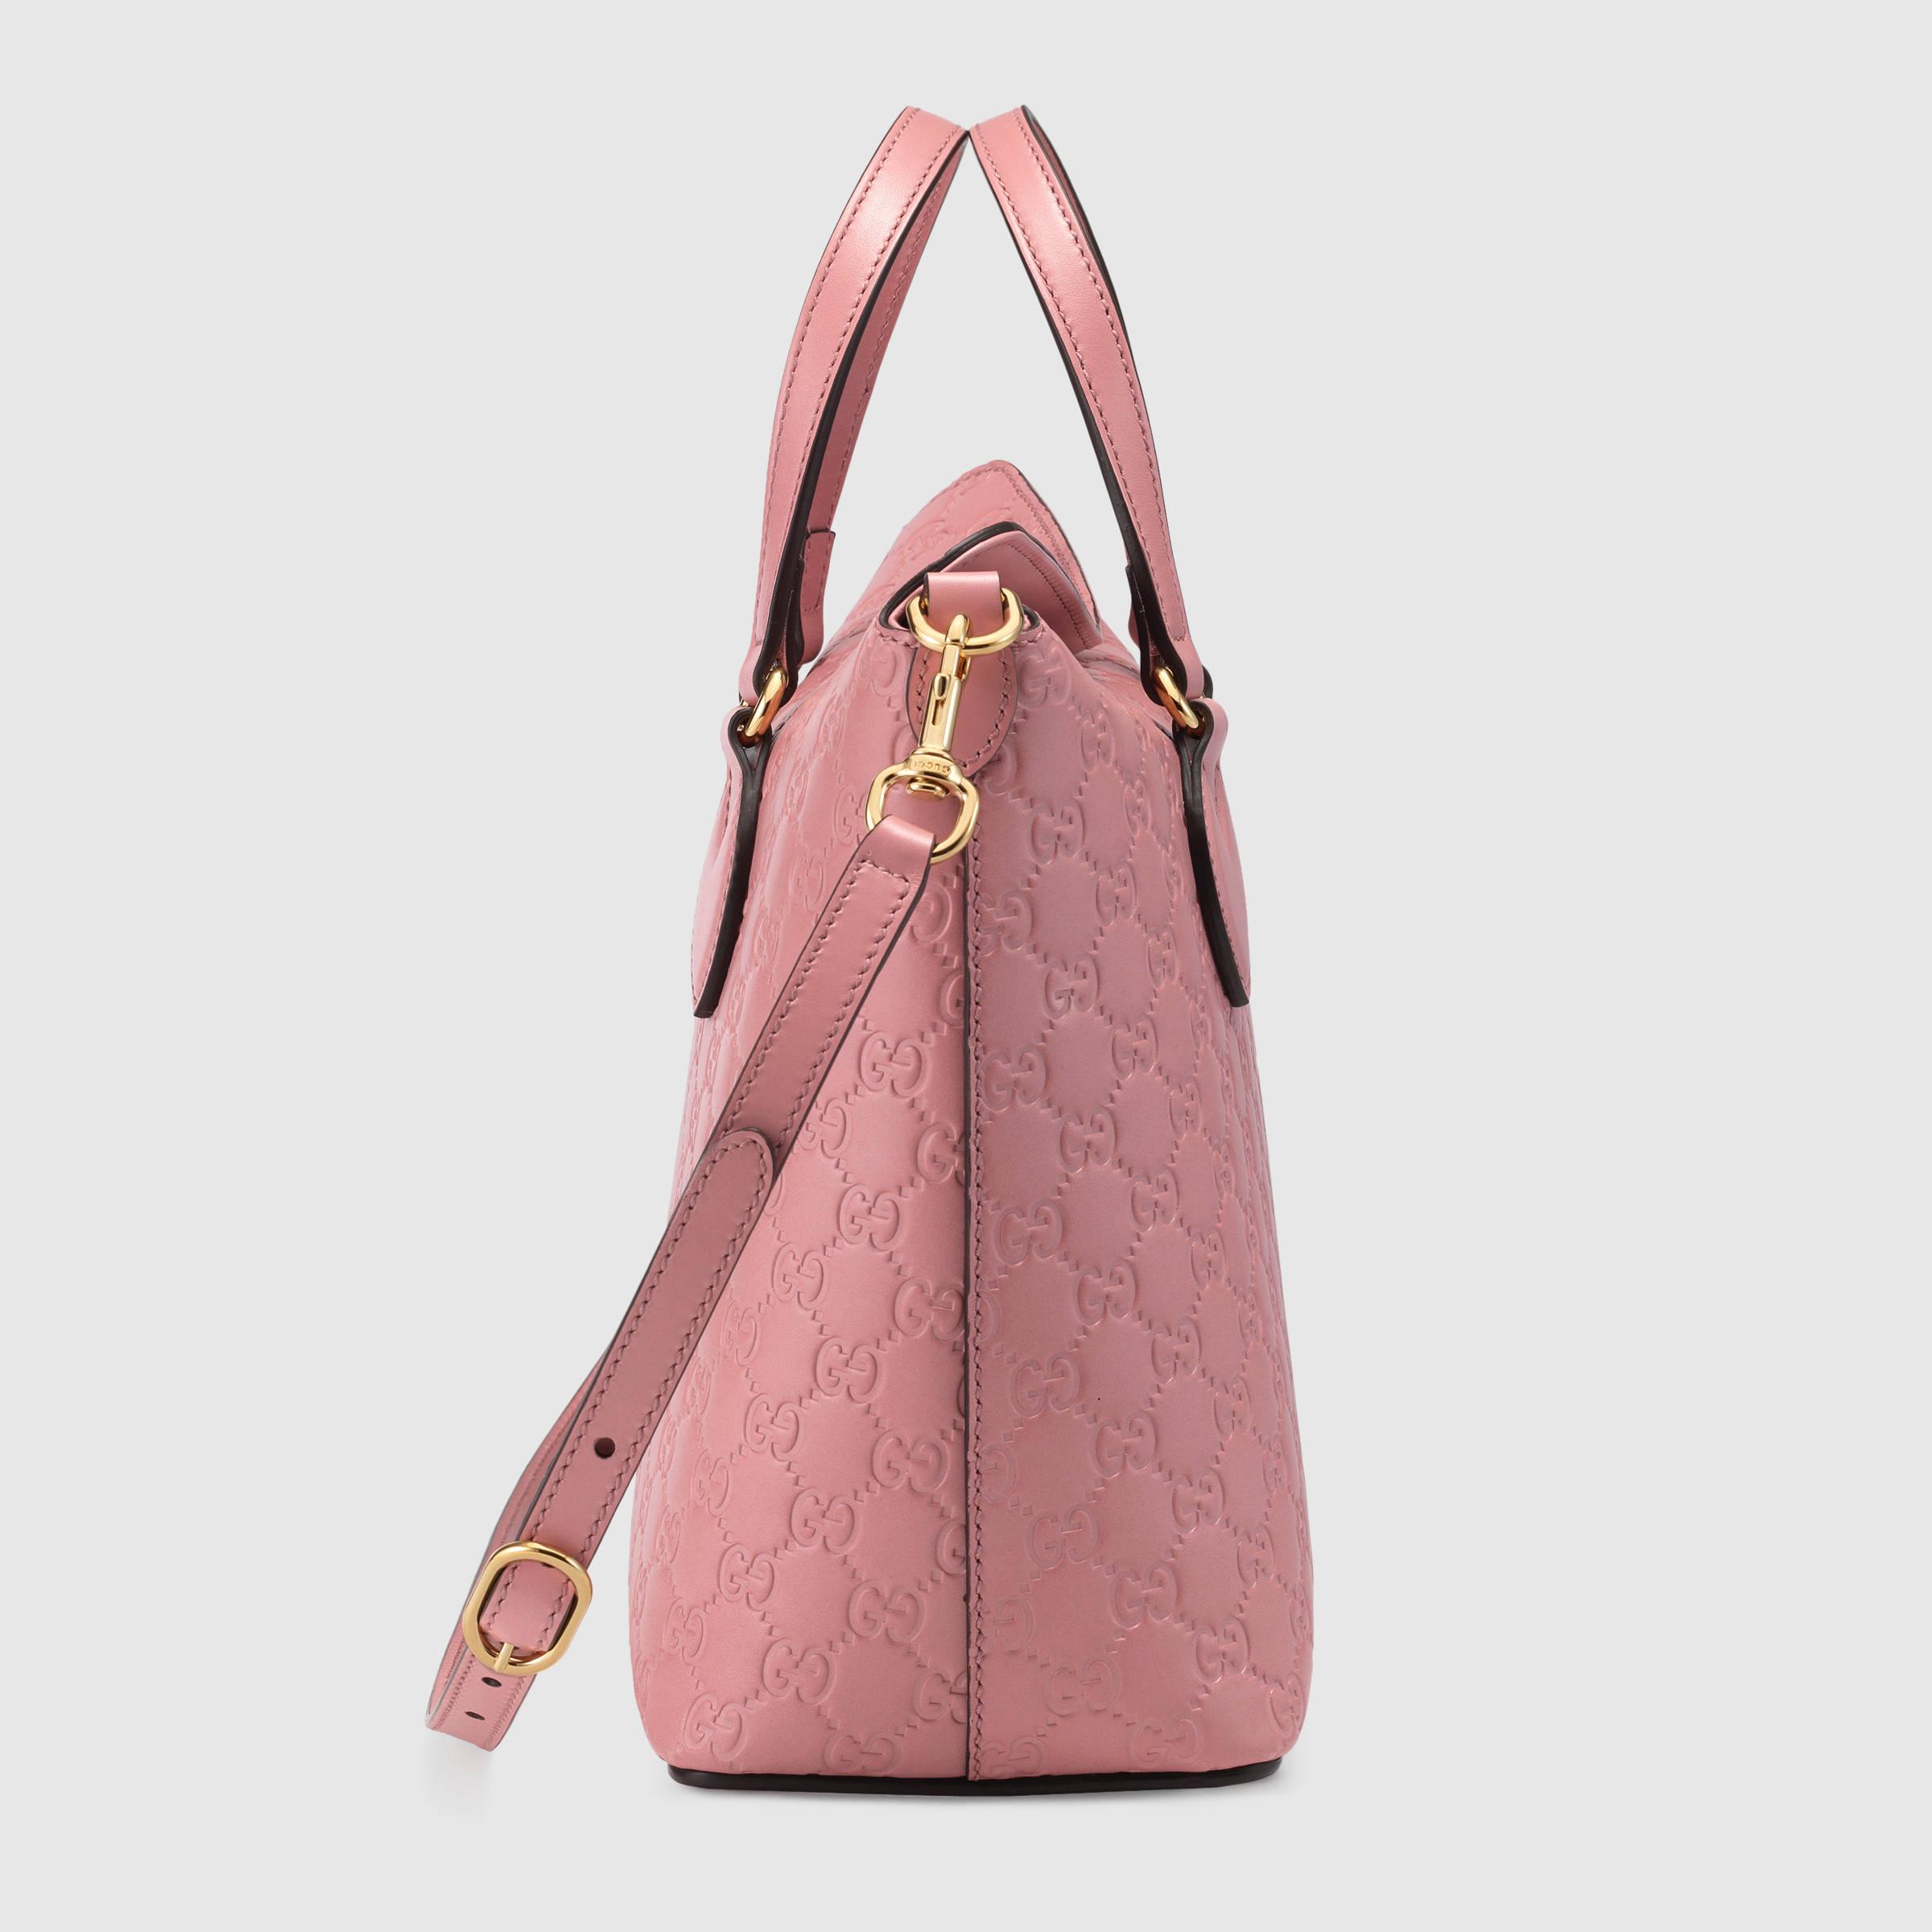 Gucci Signature Leather Top-Handle Bag in Pink - Lyst